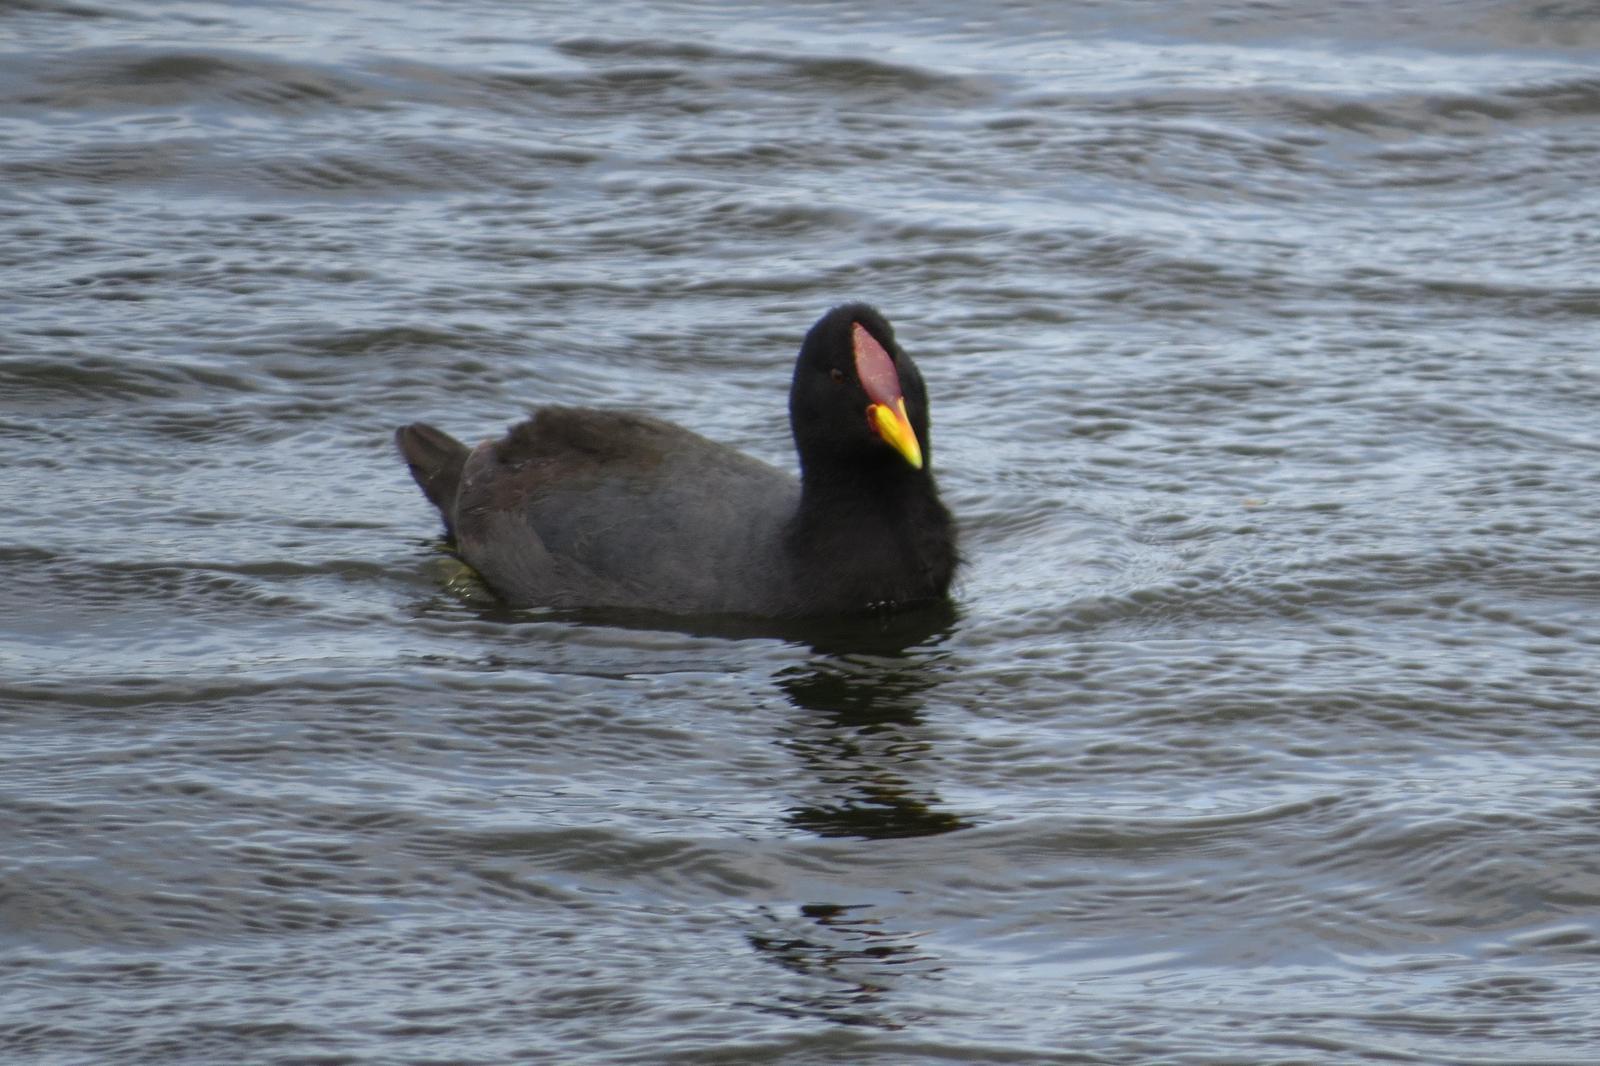 Red-fronted Coot Photo by Jeff Harding